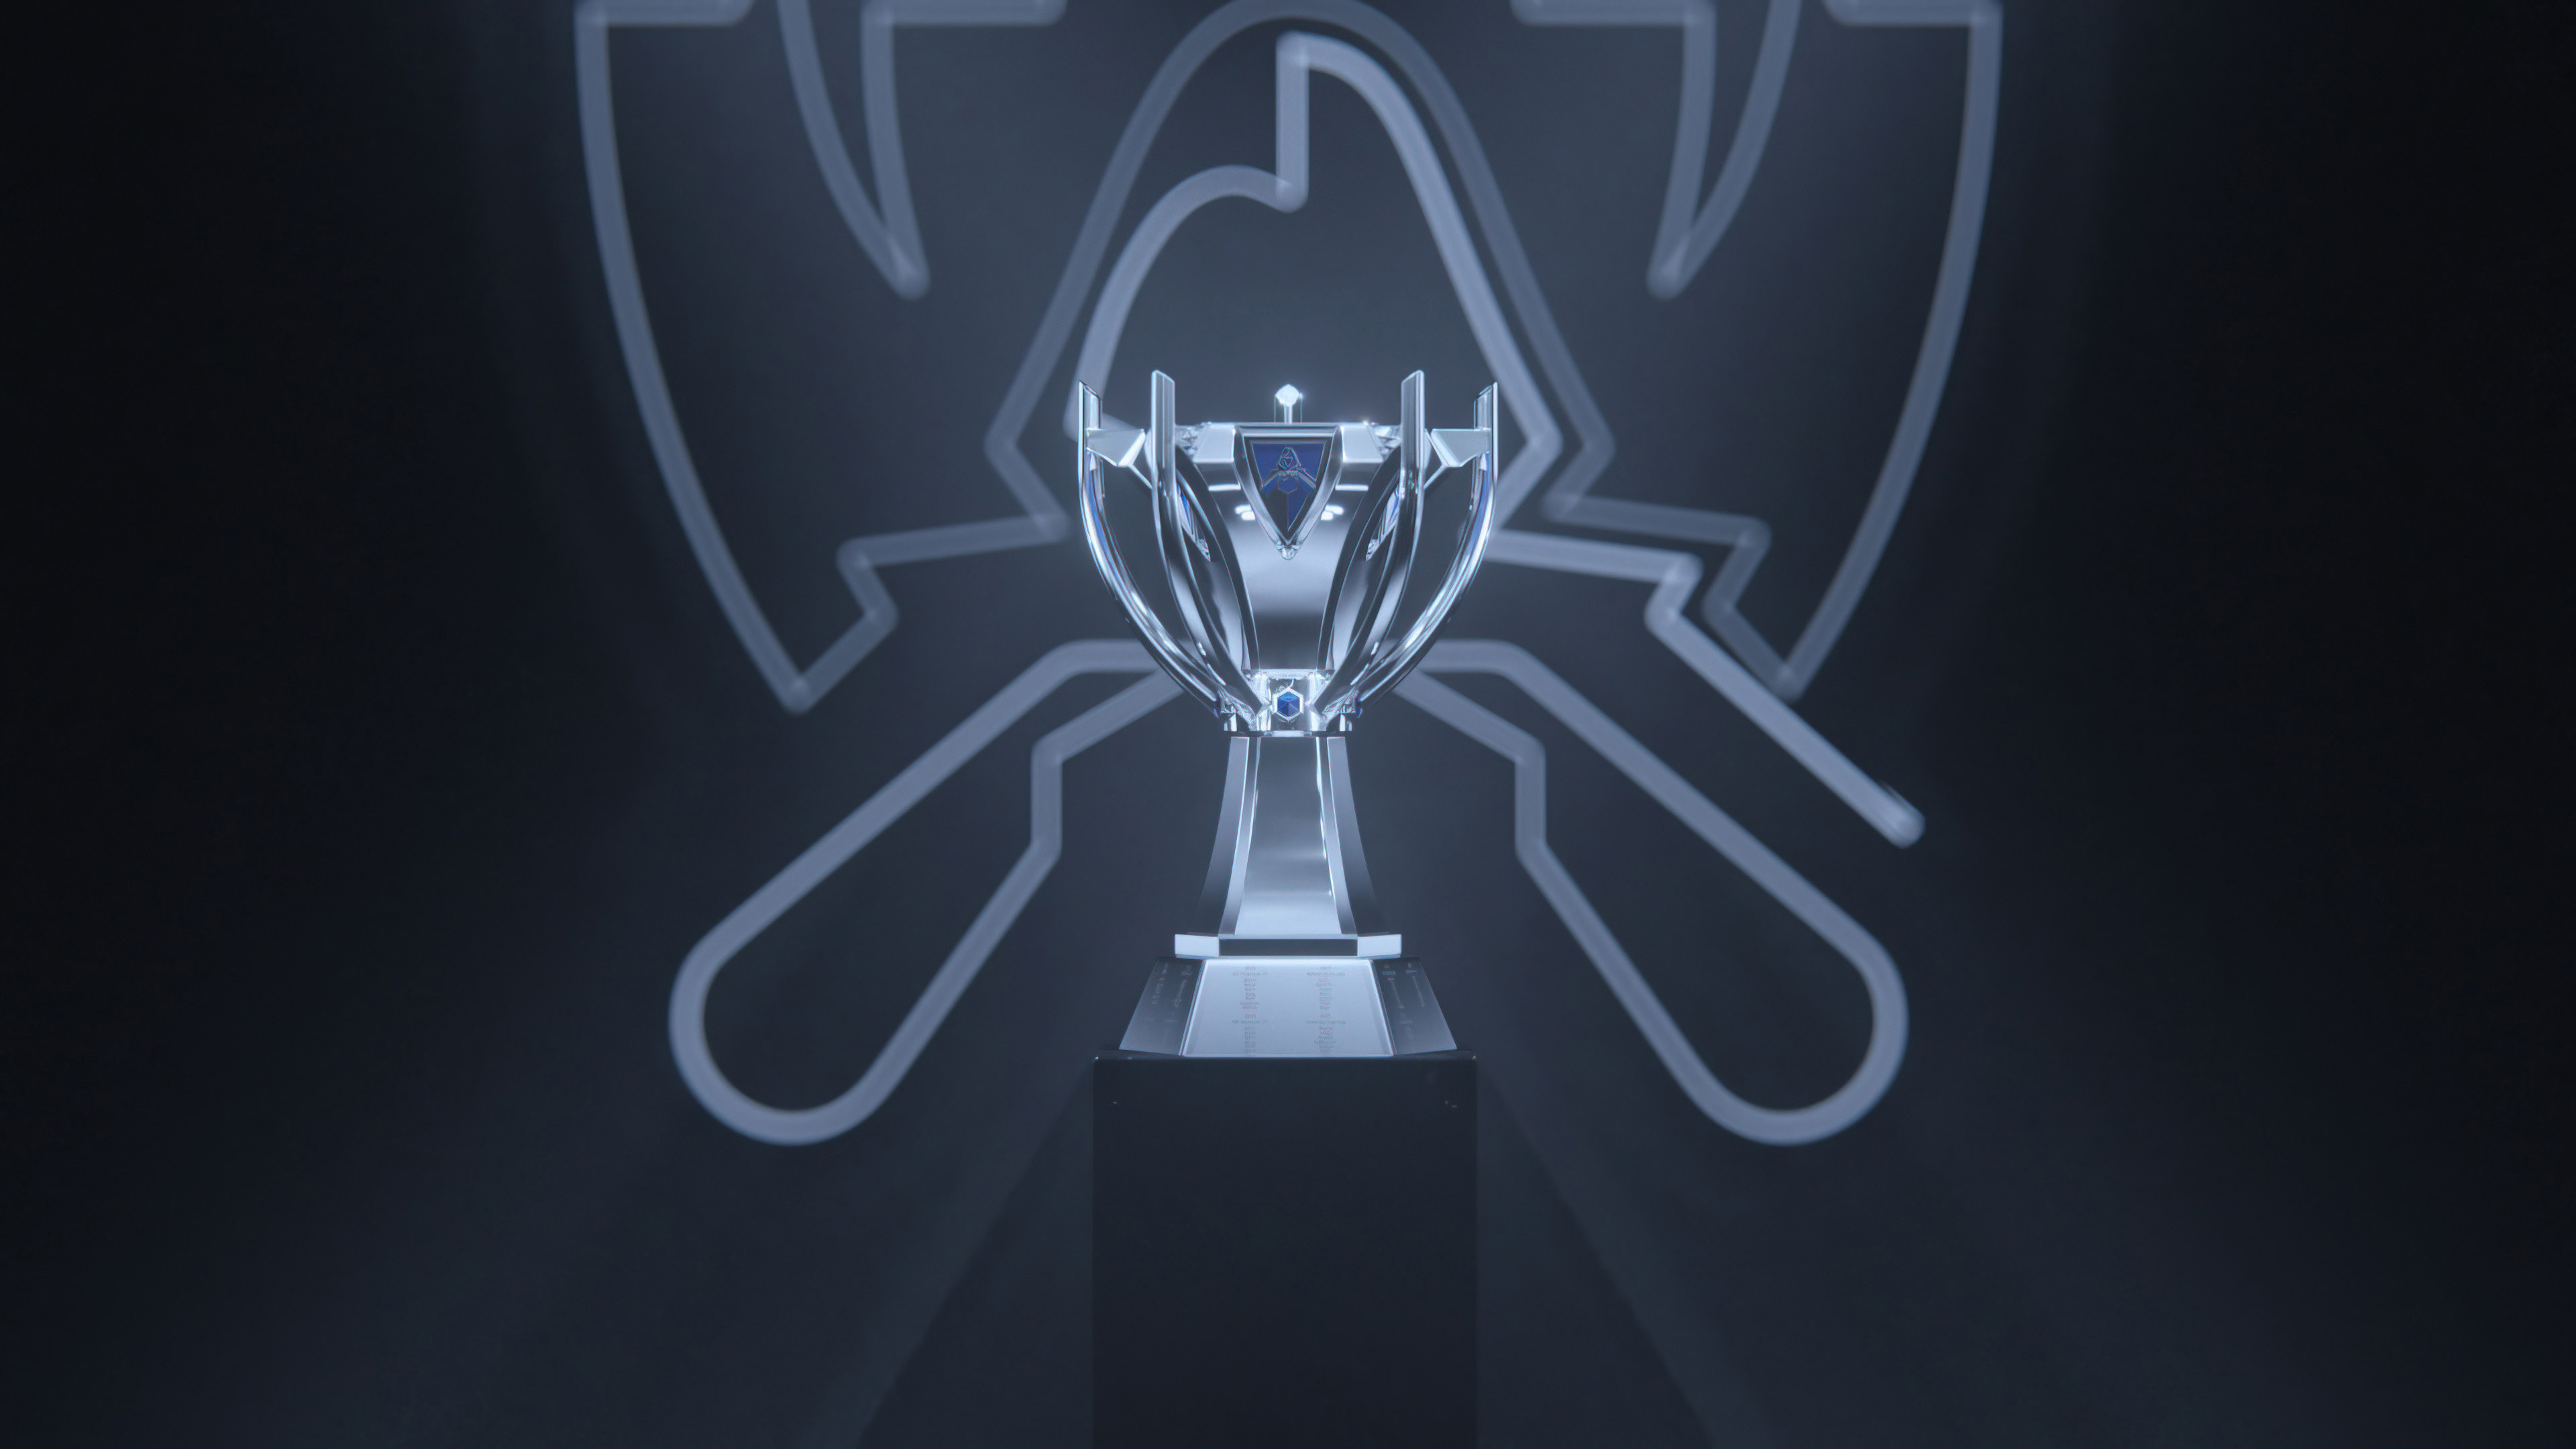 Tiffany & Co. Reveals Official 'League of Legends' World Championship  Trophy